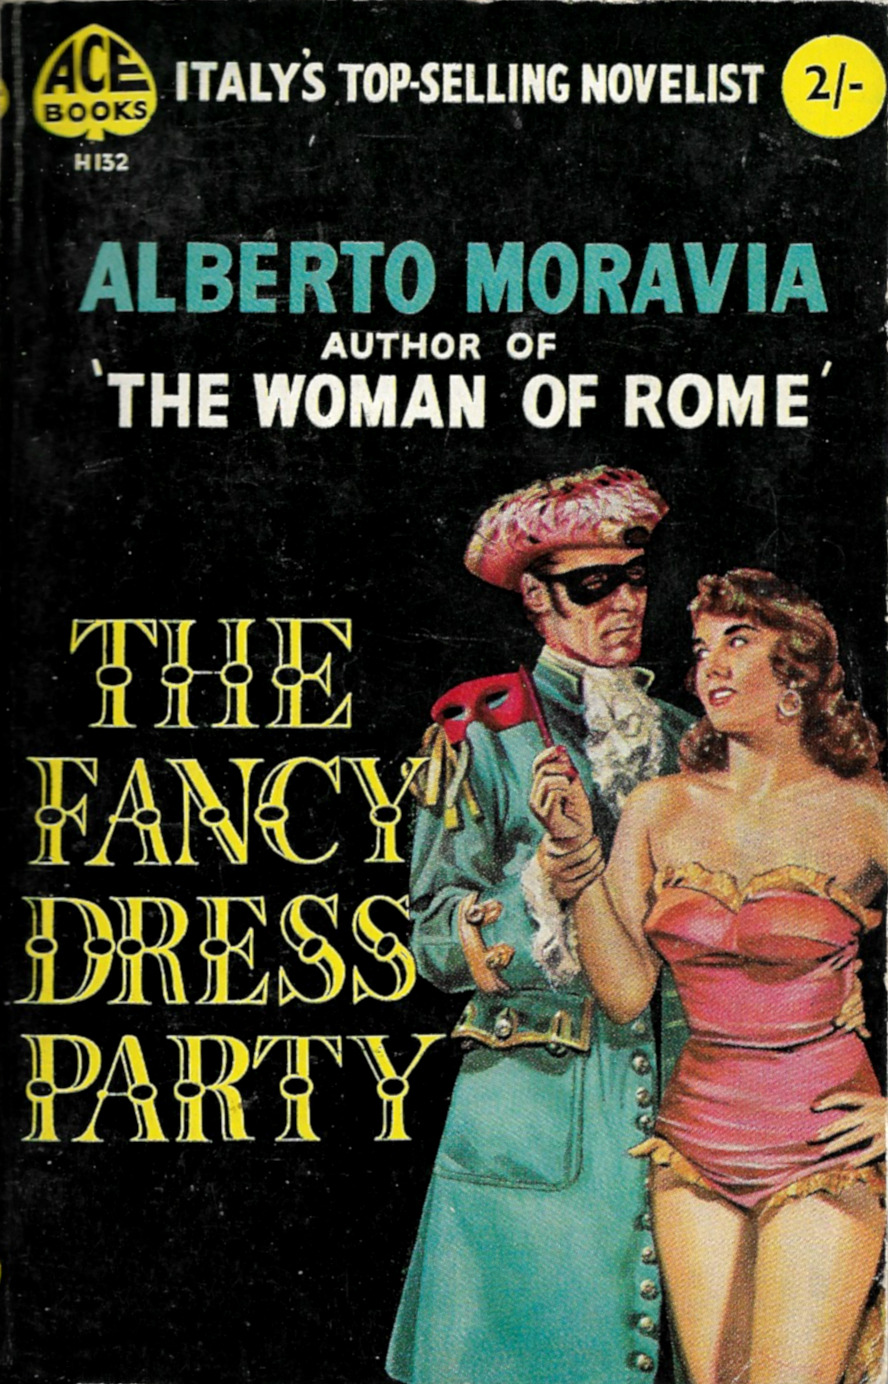 The Fancy Dress Party, by Alberto Moravia (Ace, 1957).From a box of books bought